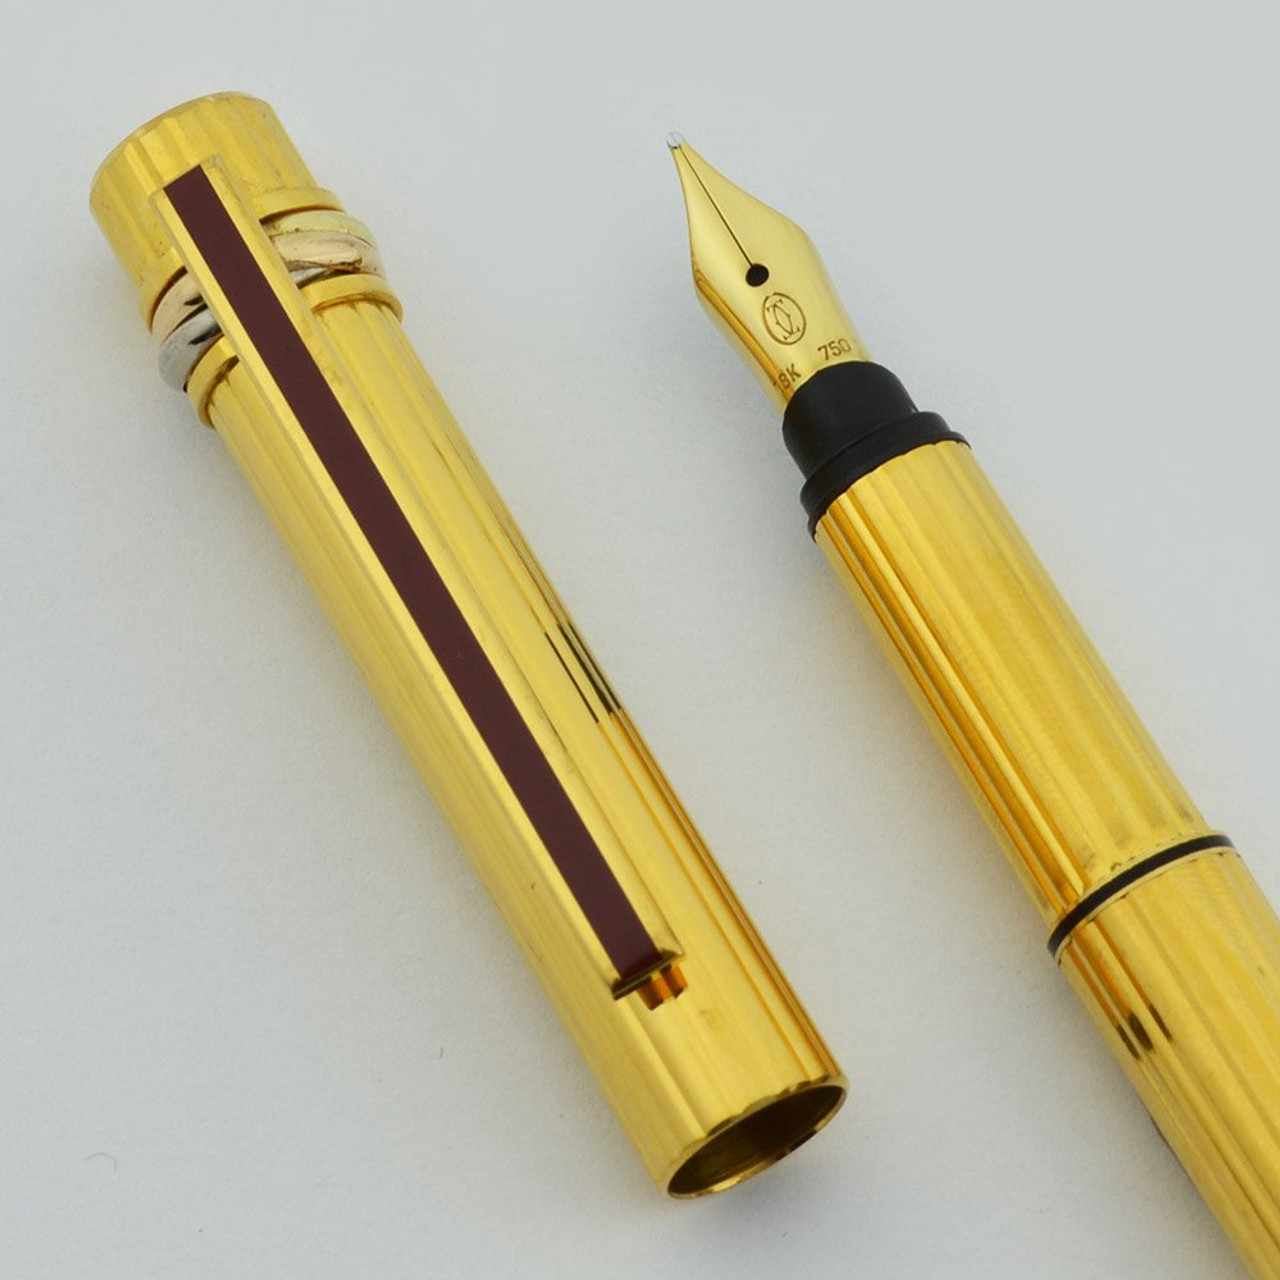 Cartier Must Trinity Fountain Pen - Full Size, Godron (Lined) Gold Plated, 18K Medium Nib (Excellent +, Works Well)